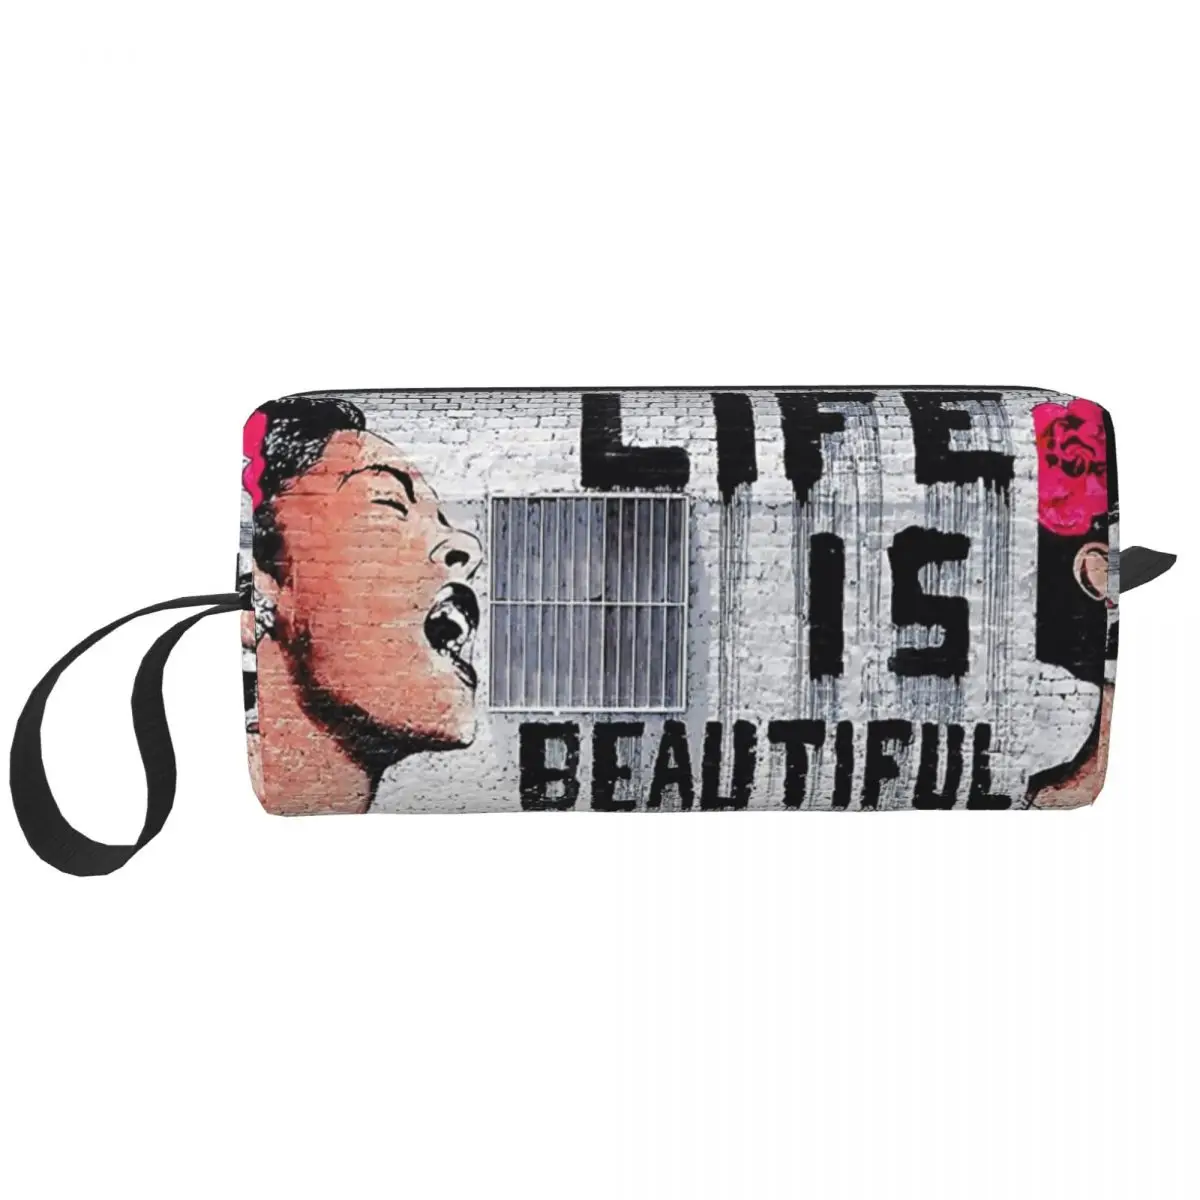 

Life Is Beautiful Banksy Graffiti Makeup Bag Pouch Waterproof Cosmetic Bag Travel Toiletry Small Makeup Pouch Storage Bag Large